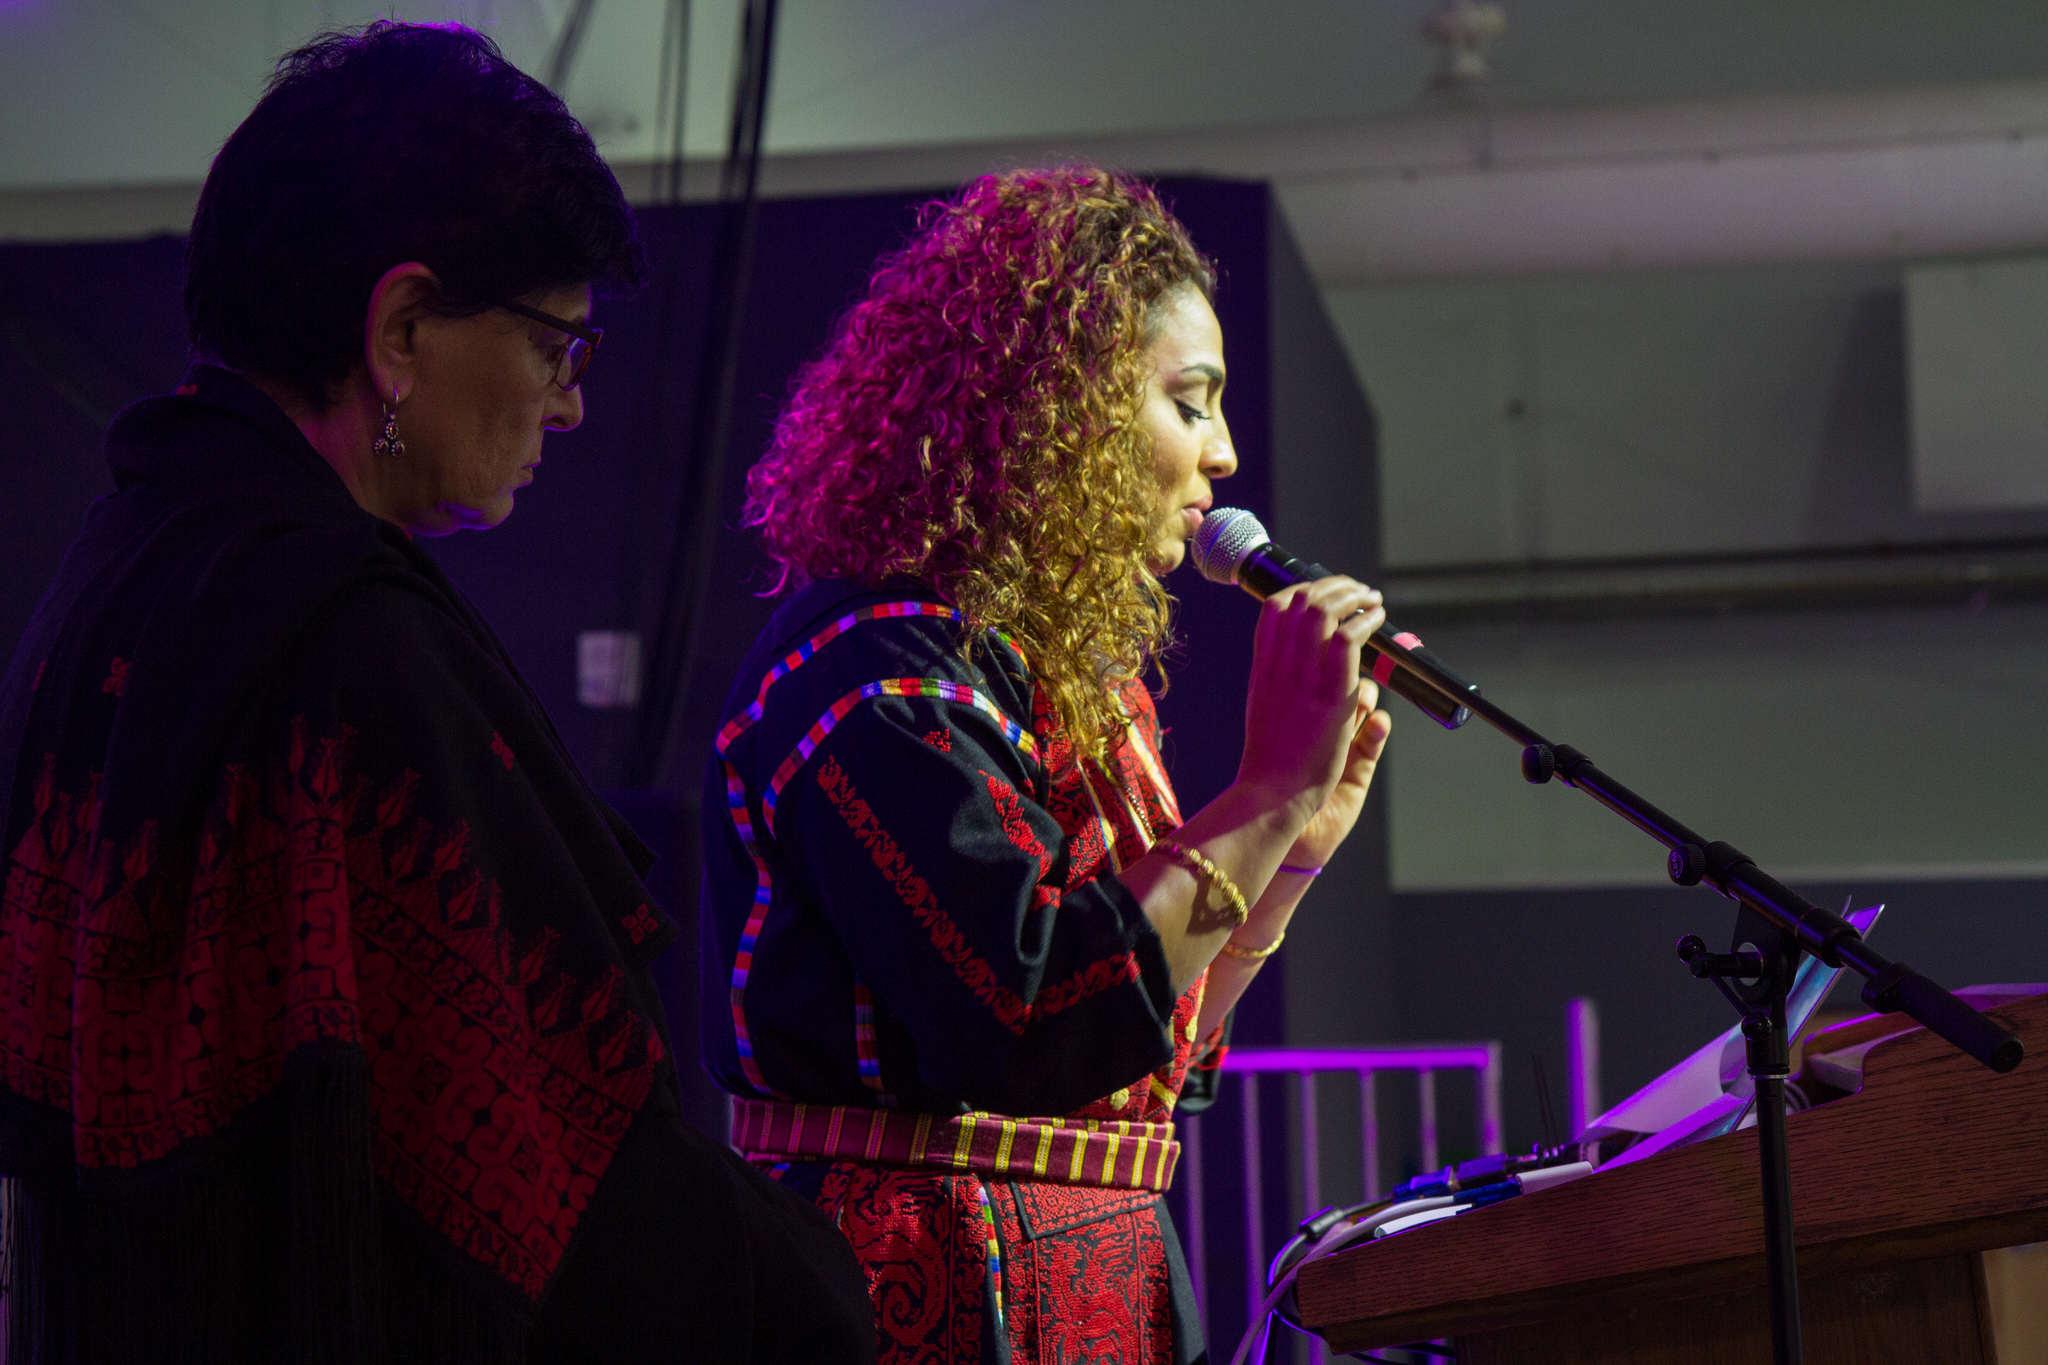 Professor Rabab Abdulhadi stands beside GUPS President Lubna Morrar as she recites a poem by Samih Al-Qassem, at the 7th Annual Edward Said Mural Celebration in the SF State Student Event Center on Wednesday, Nov. 5, 2014.